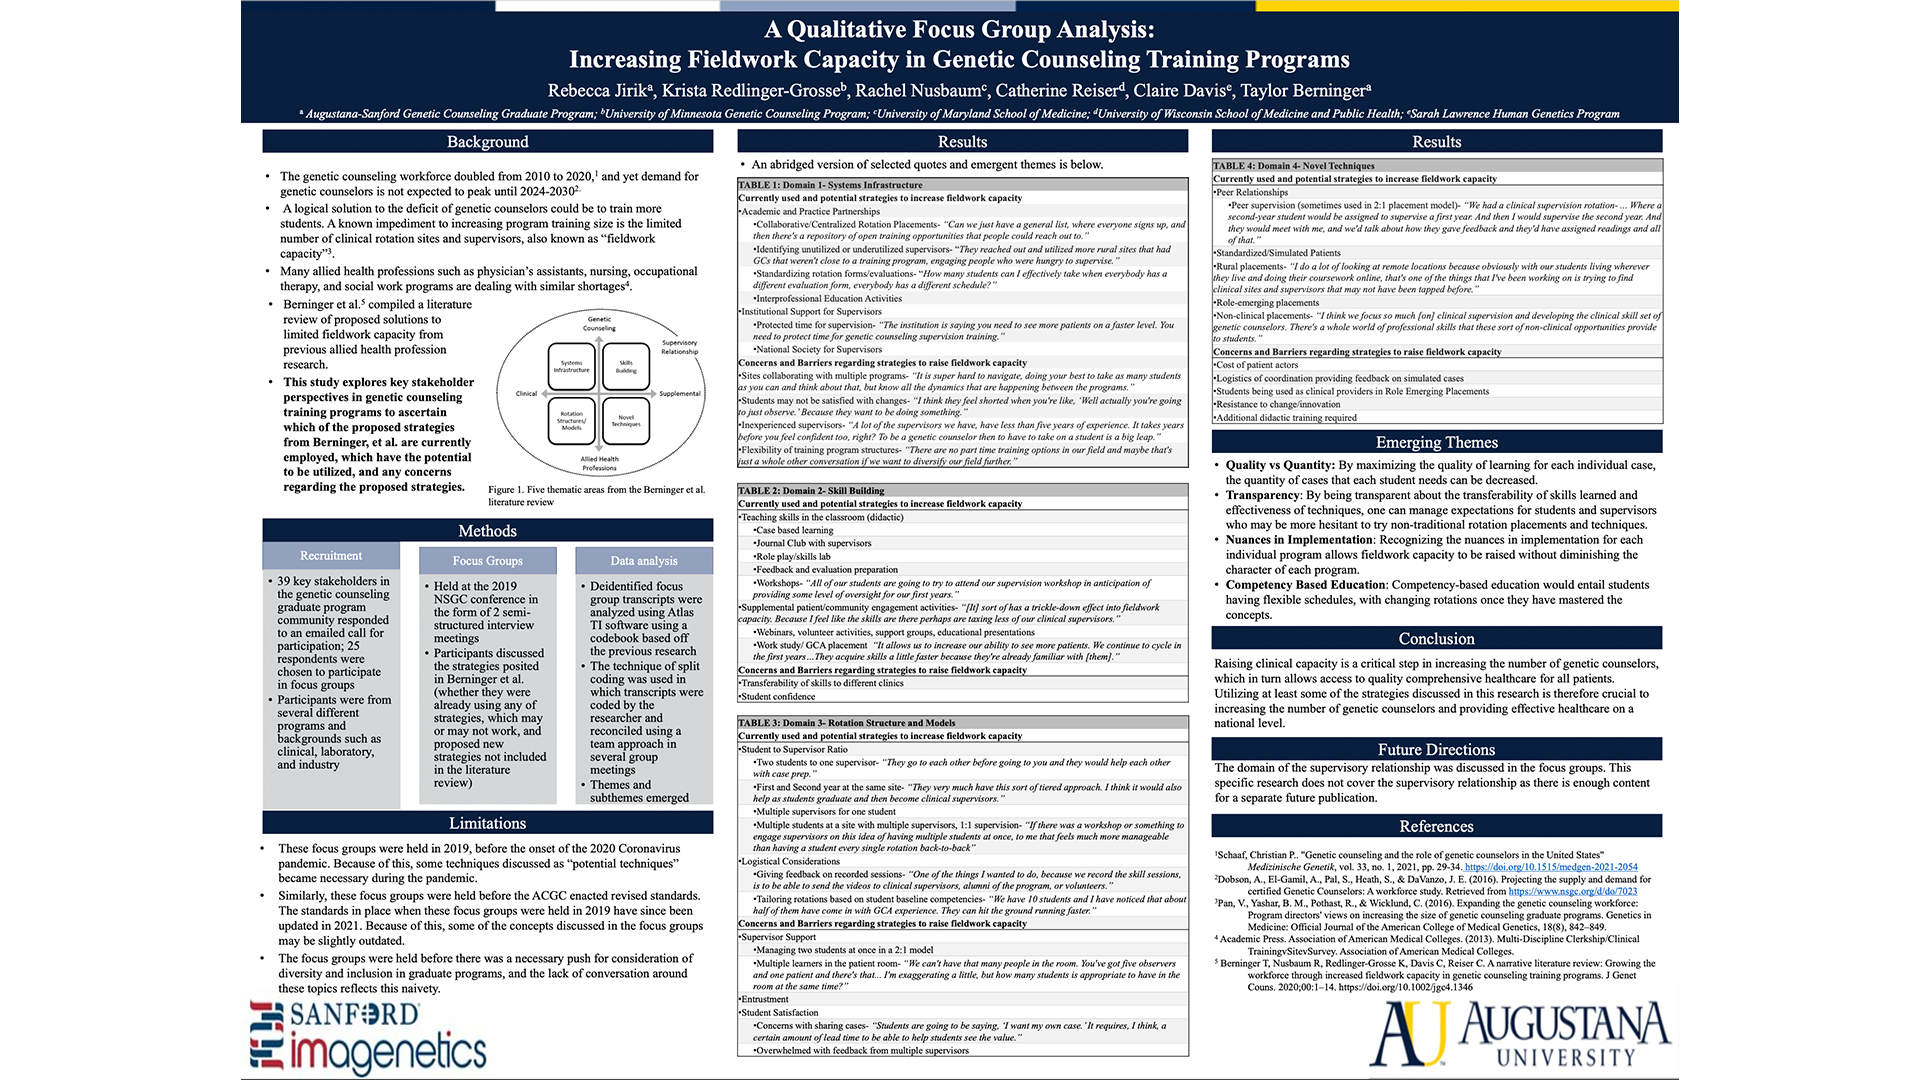 A Qualitative Focus Group Analysis- Increasing Fieldwork Capacity in Genetic Counseling Training Programs Poster